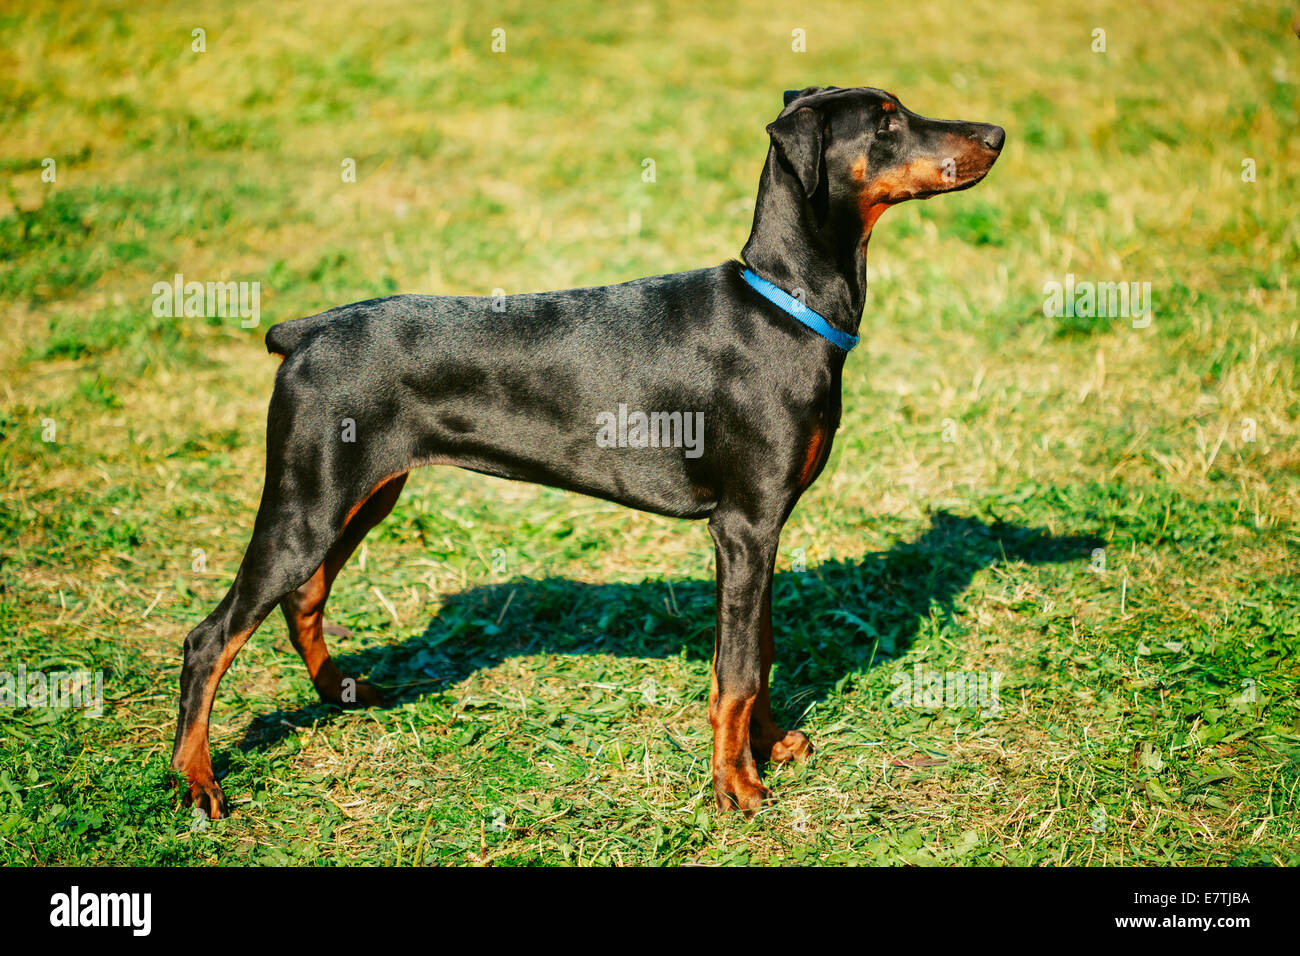 Young, Beautiful, Black And Tan Doberman Standing On The Lawn. Dobermann Is A Breed Known For Being Intelligent, Alert, And Loya Stock Photo